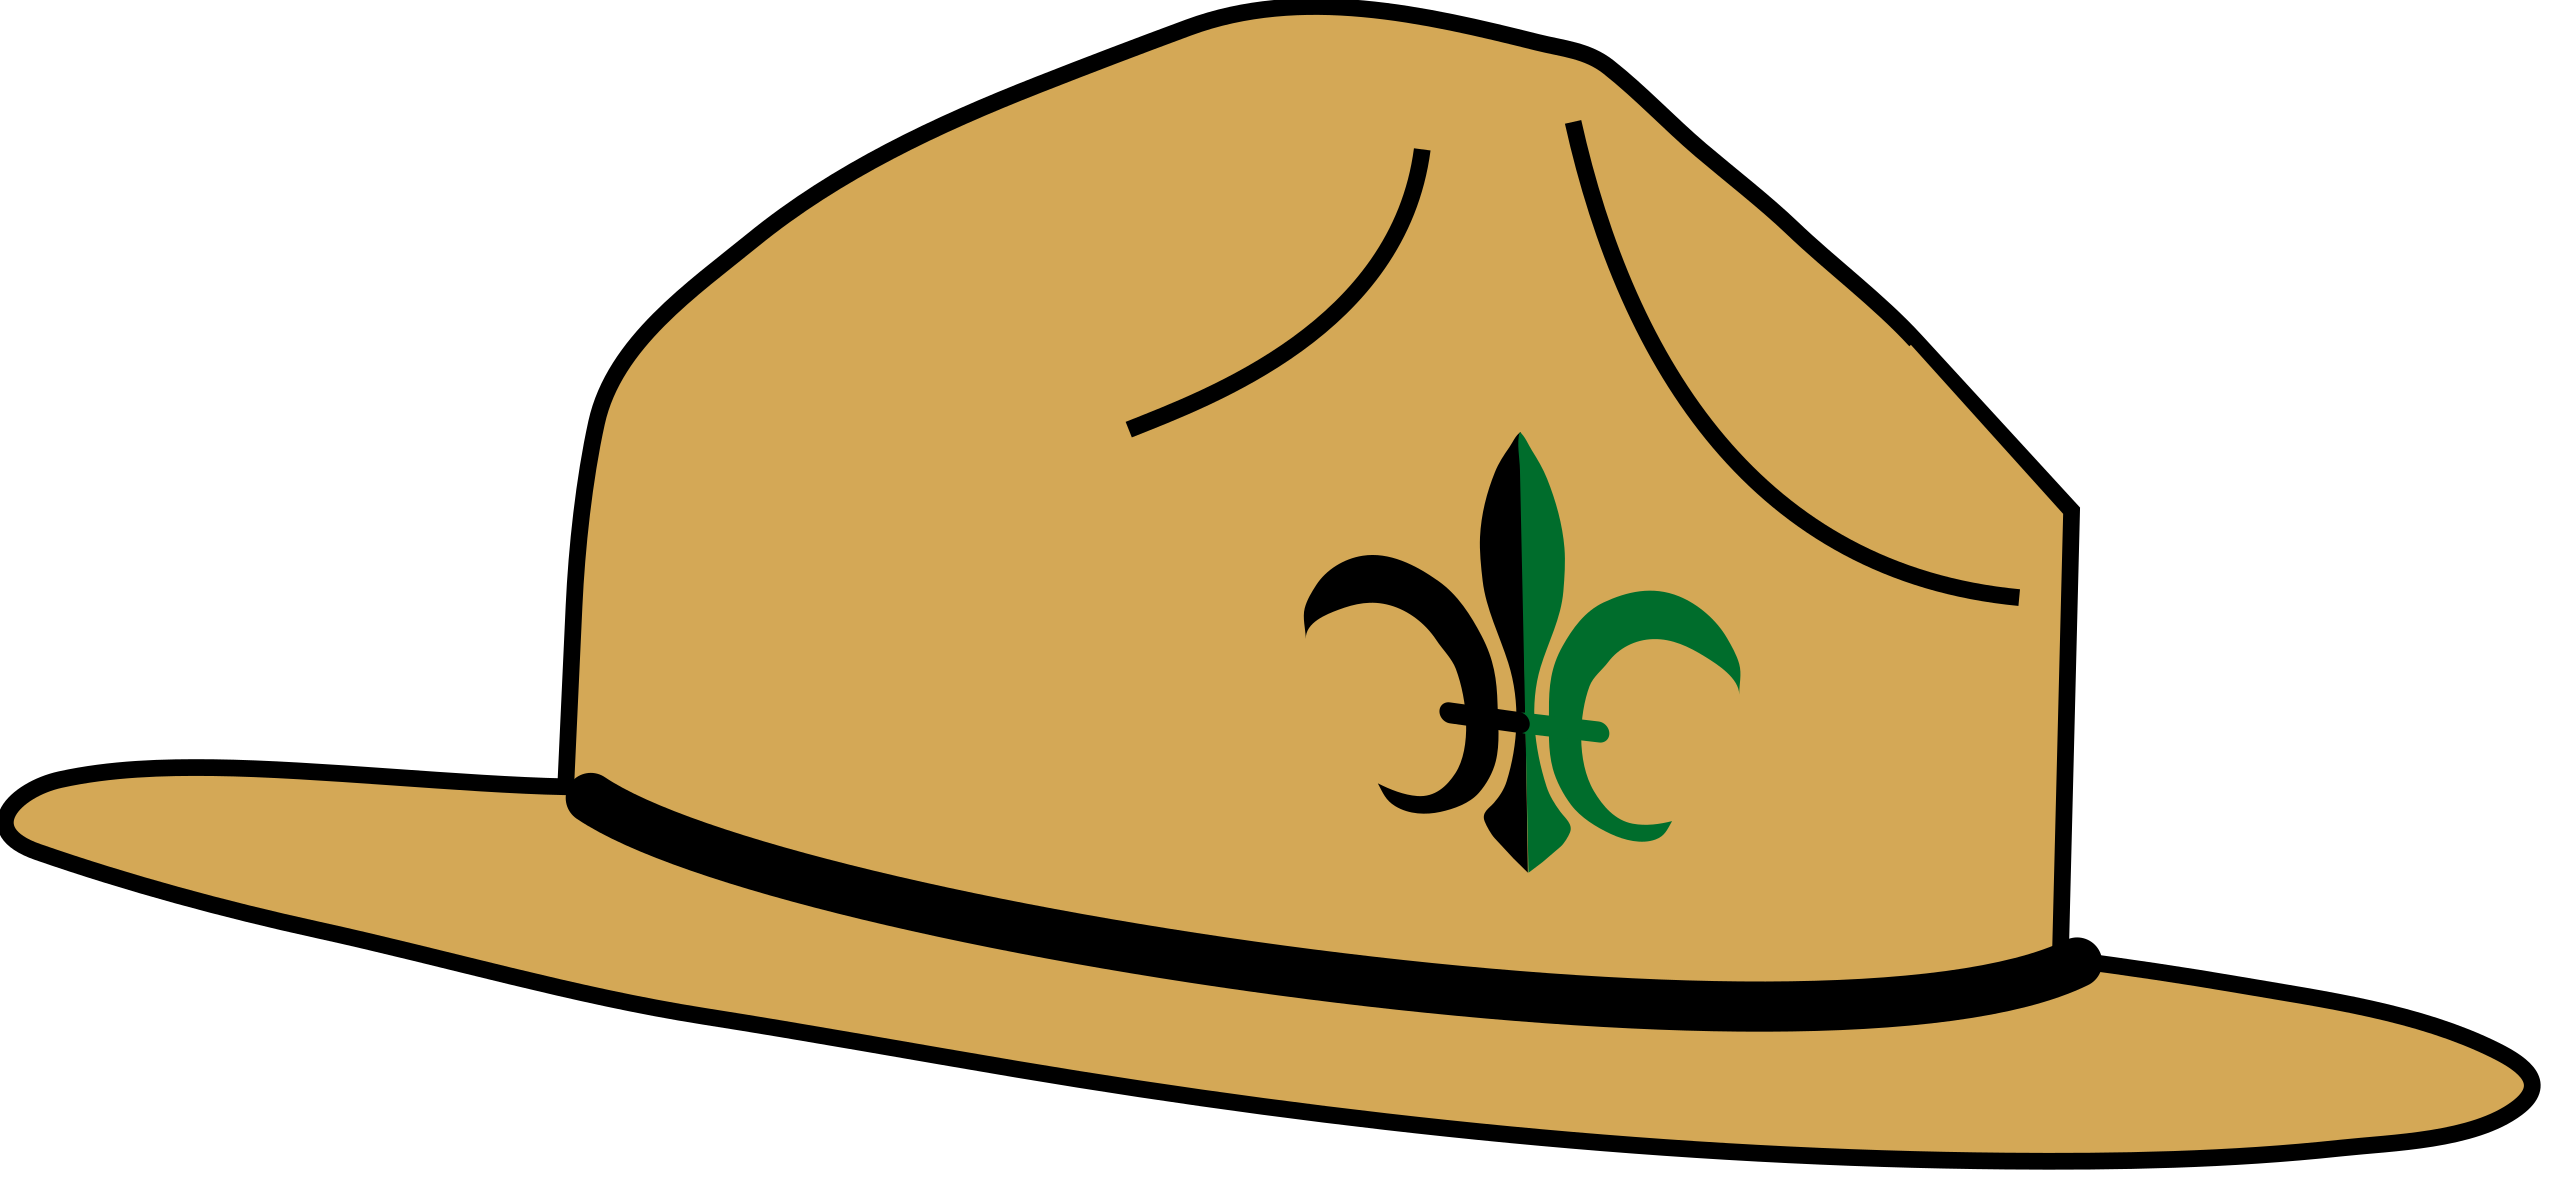 https://upload.wikimedia.org/wikipedia/commons/thumb/d/d3/WikiProject_Scouting_campaign_hat.svg/2560px-WikiProject_Scouting_campaign_hat.svg.png